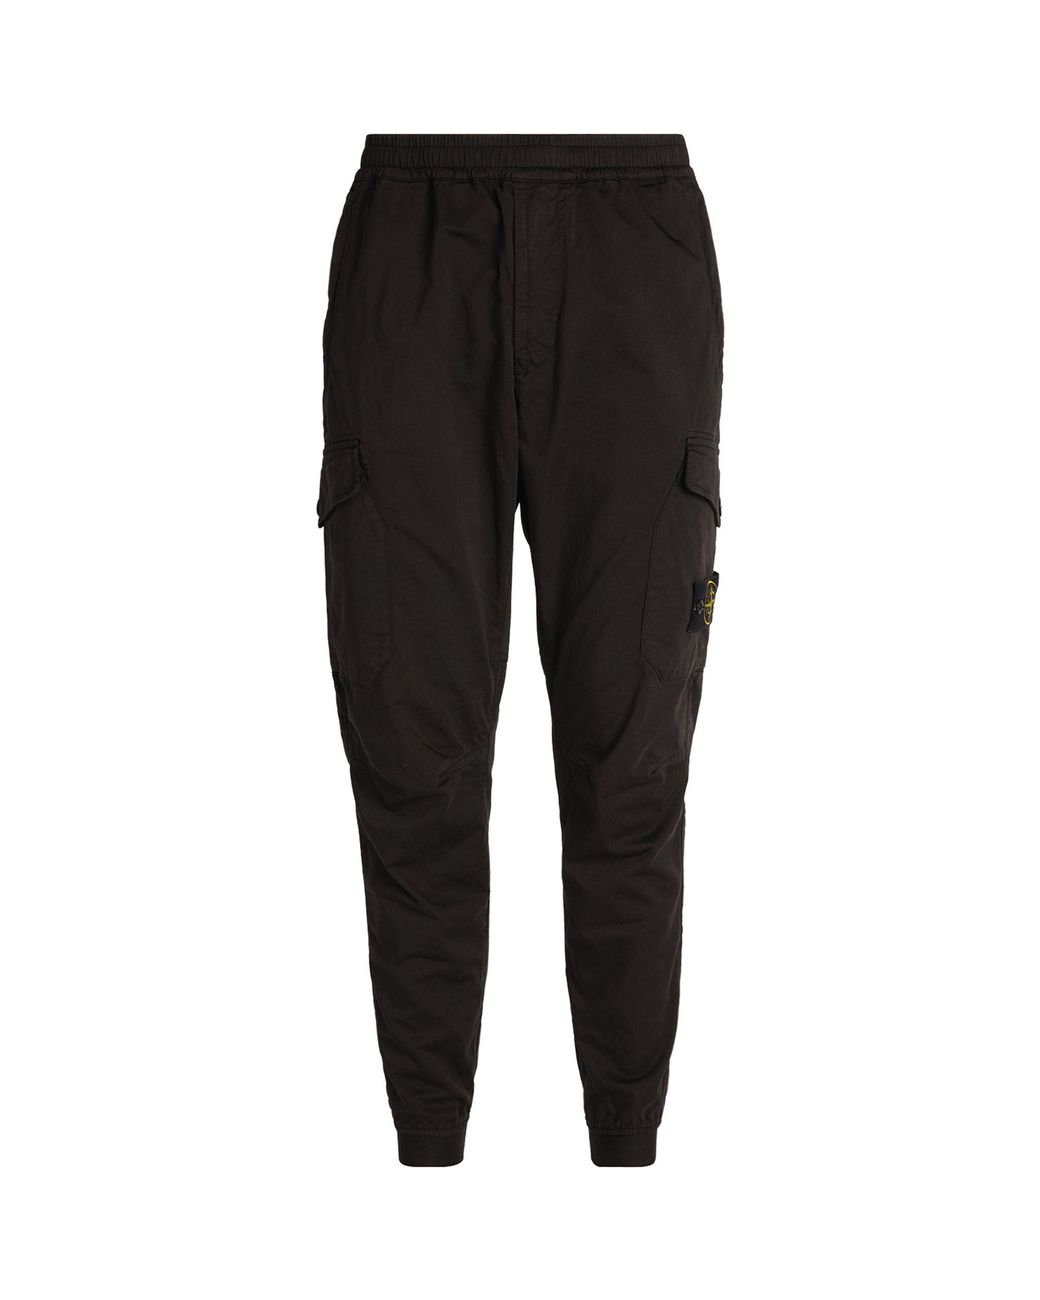 Stone Island Cotton Cuffed Cargo Trousers in Black for Men - Lyst